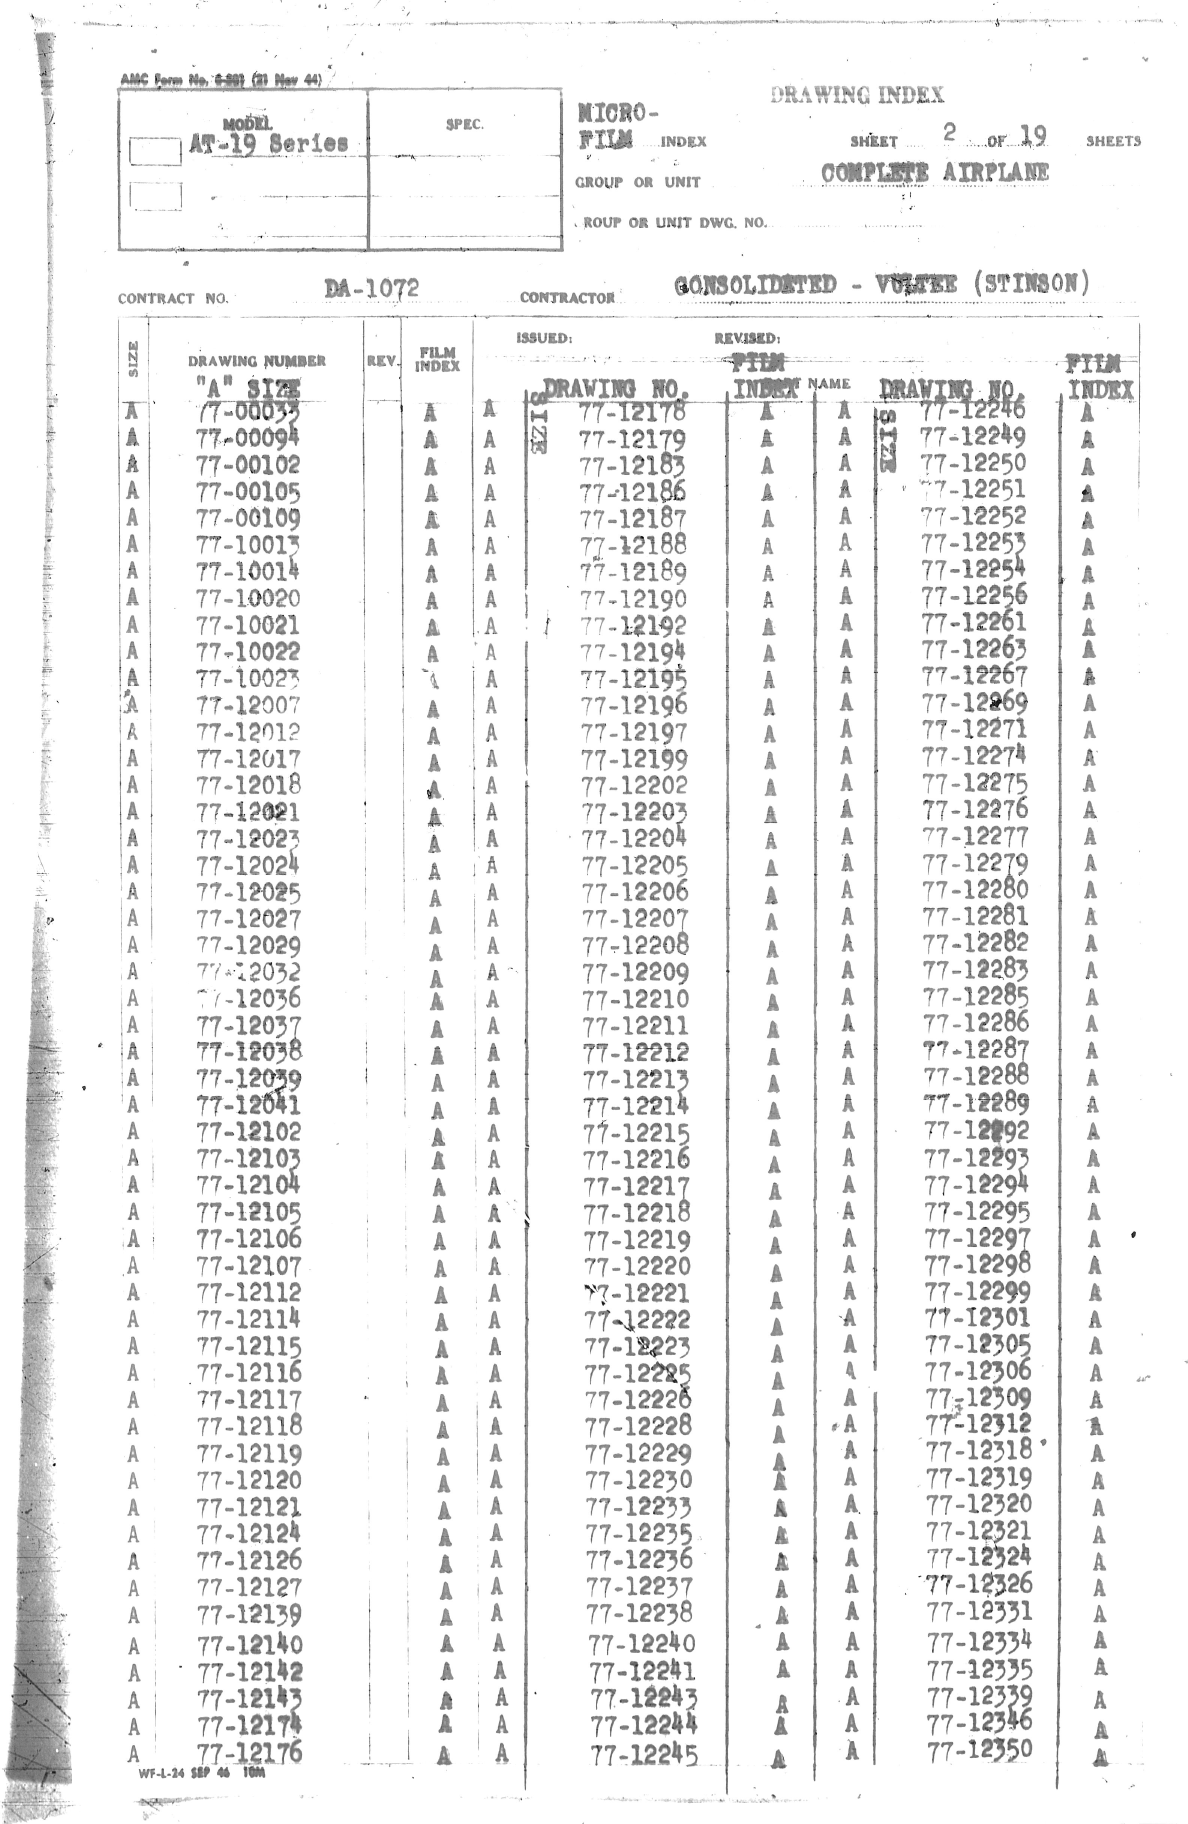 Sample page 5 from AirCorps Library document: Index of Inactive Contractors and Engineering Drawings and Data for AT-19